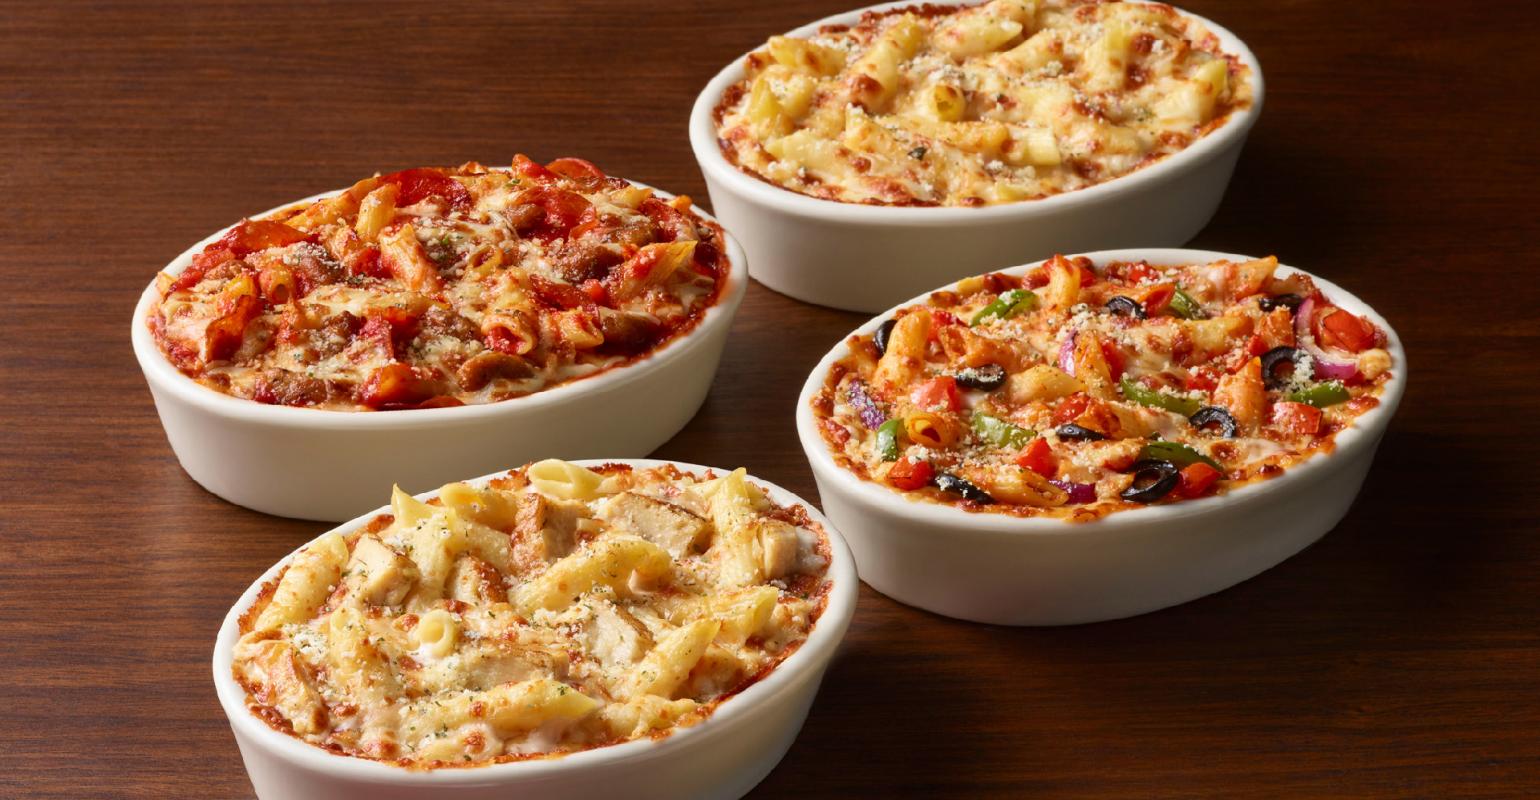 Pizza Hut relaunches baked pastas with new recipes | Nation's Restaurant  News